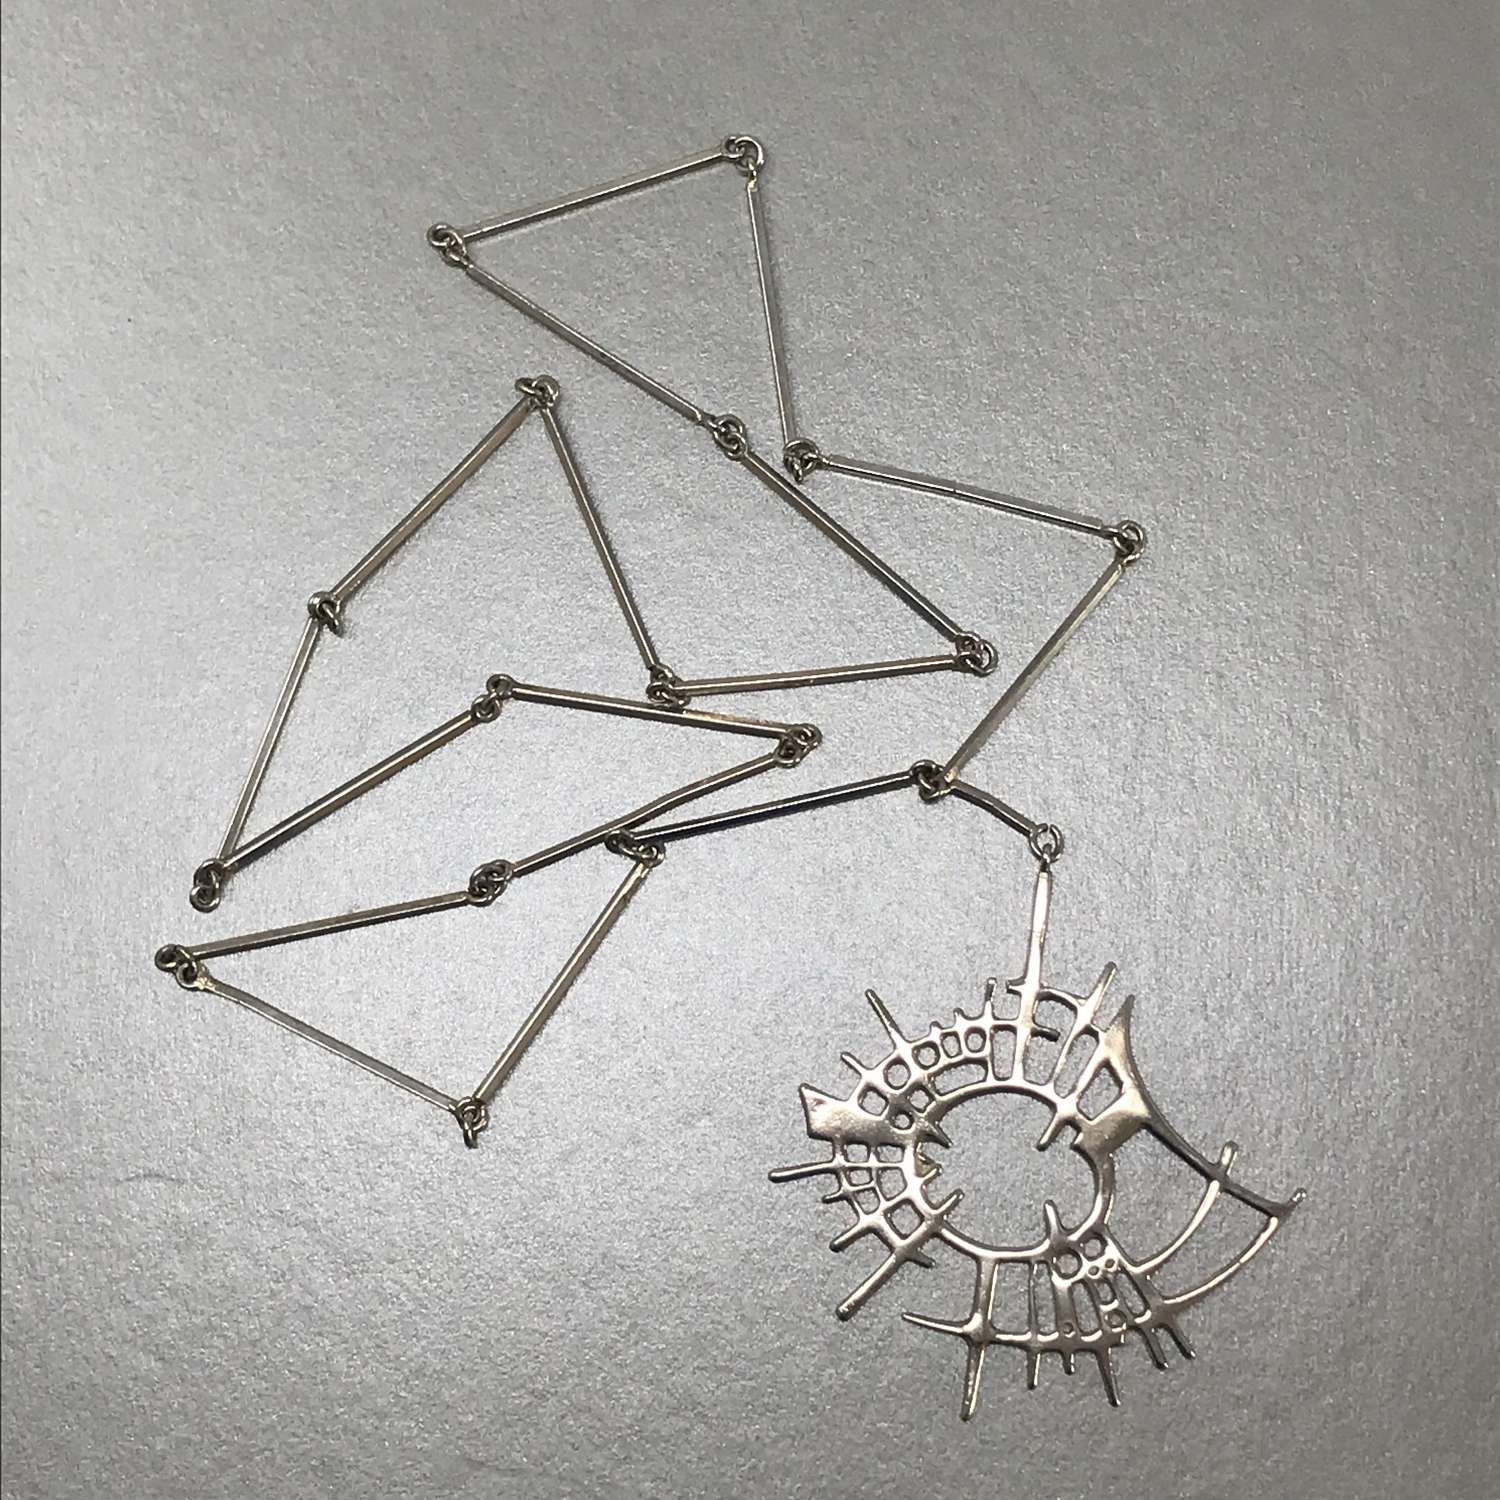 Juhls pendant and necklace, Norway c 1960s